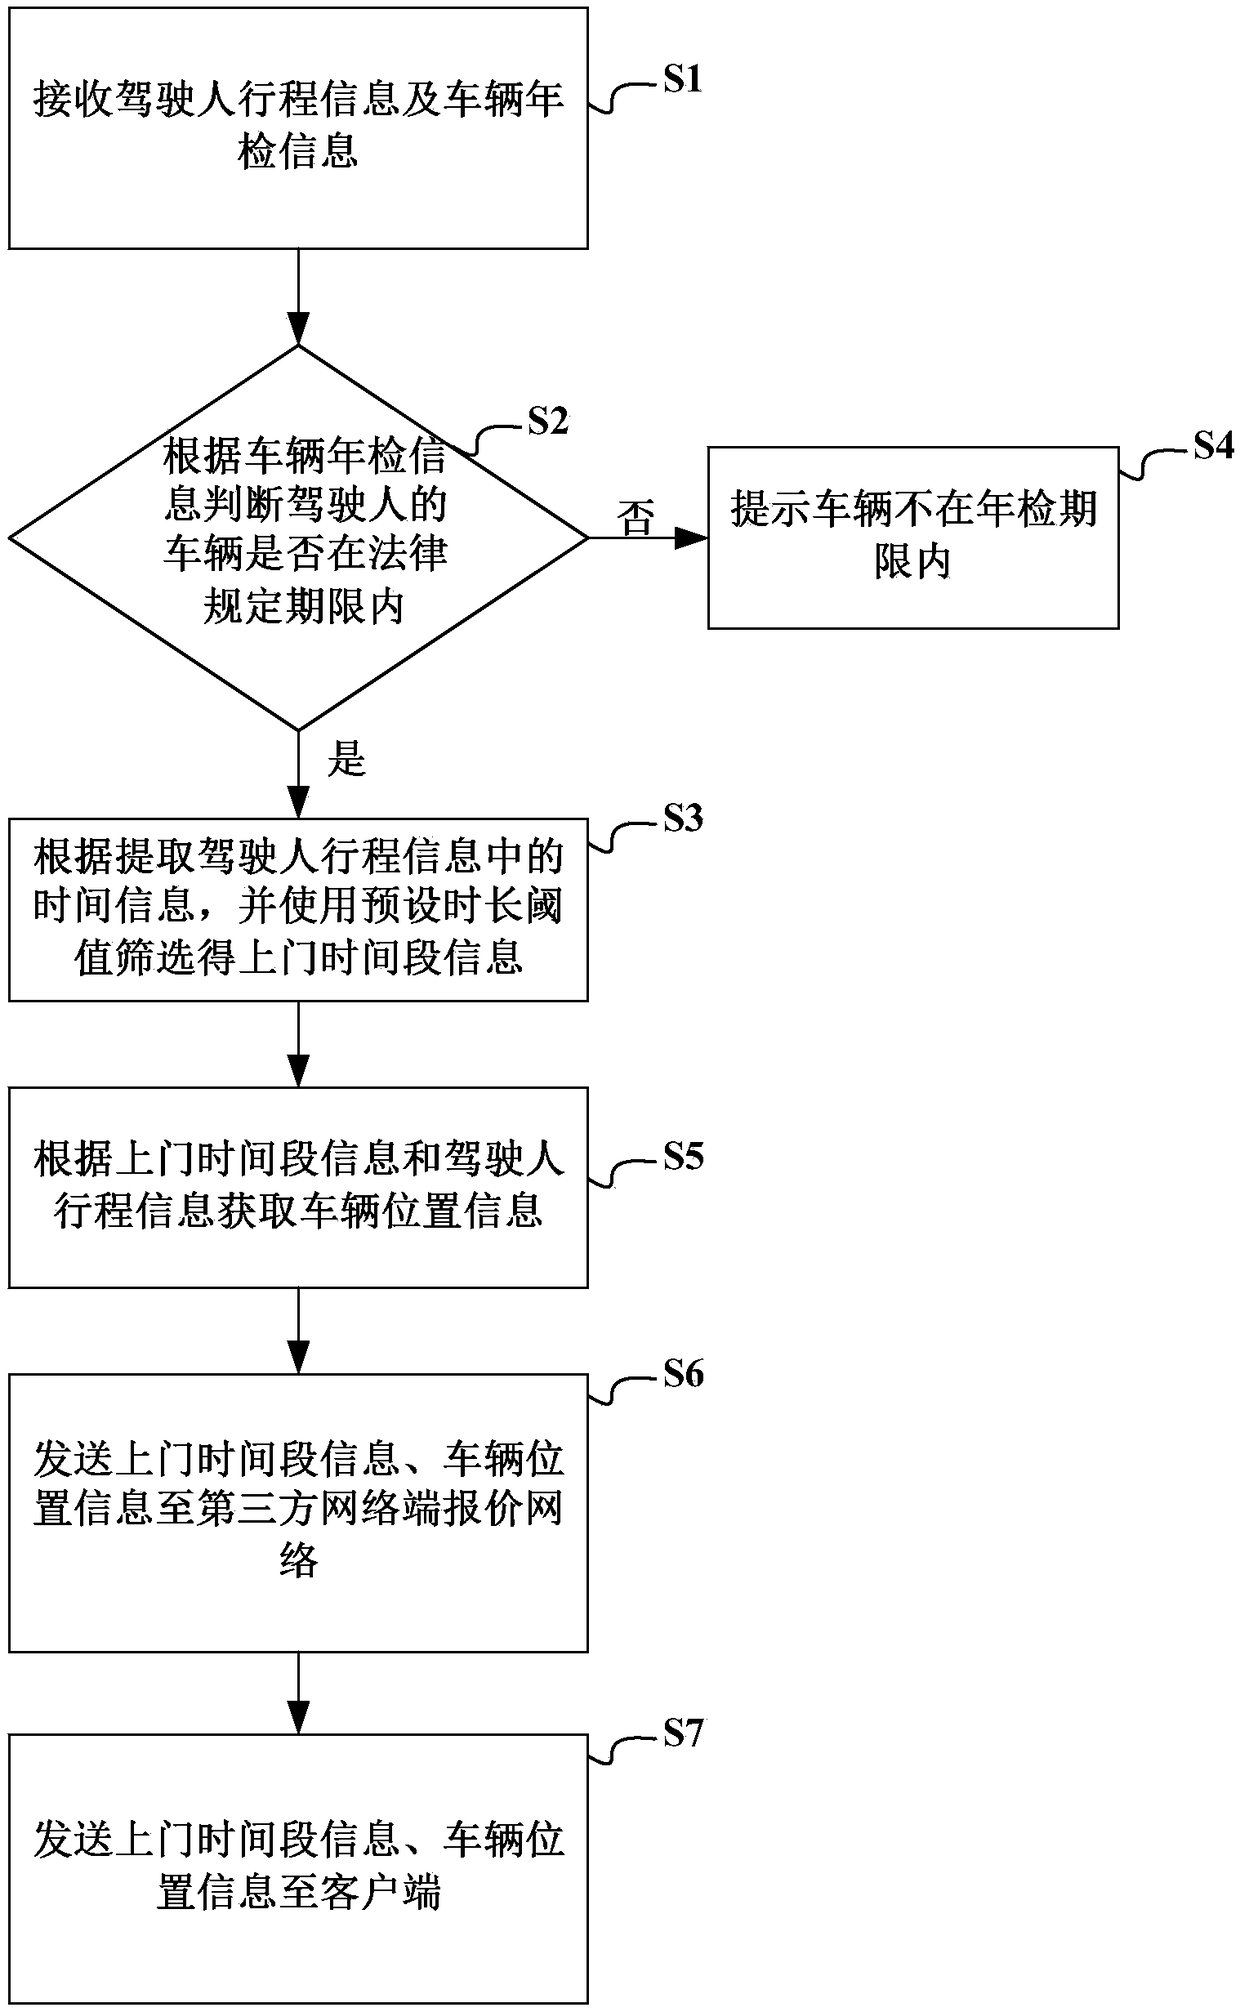 Vehicle annual inspection method based on user journey, server, client and network terminal